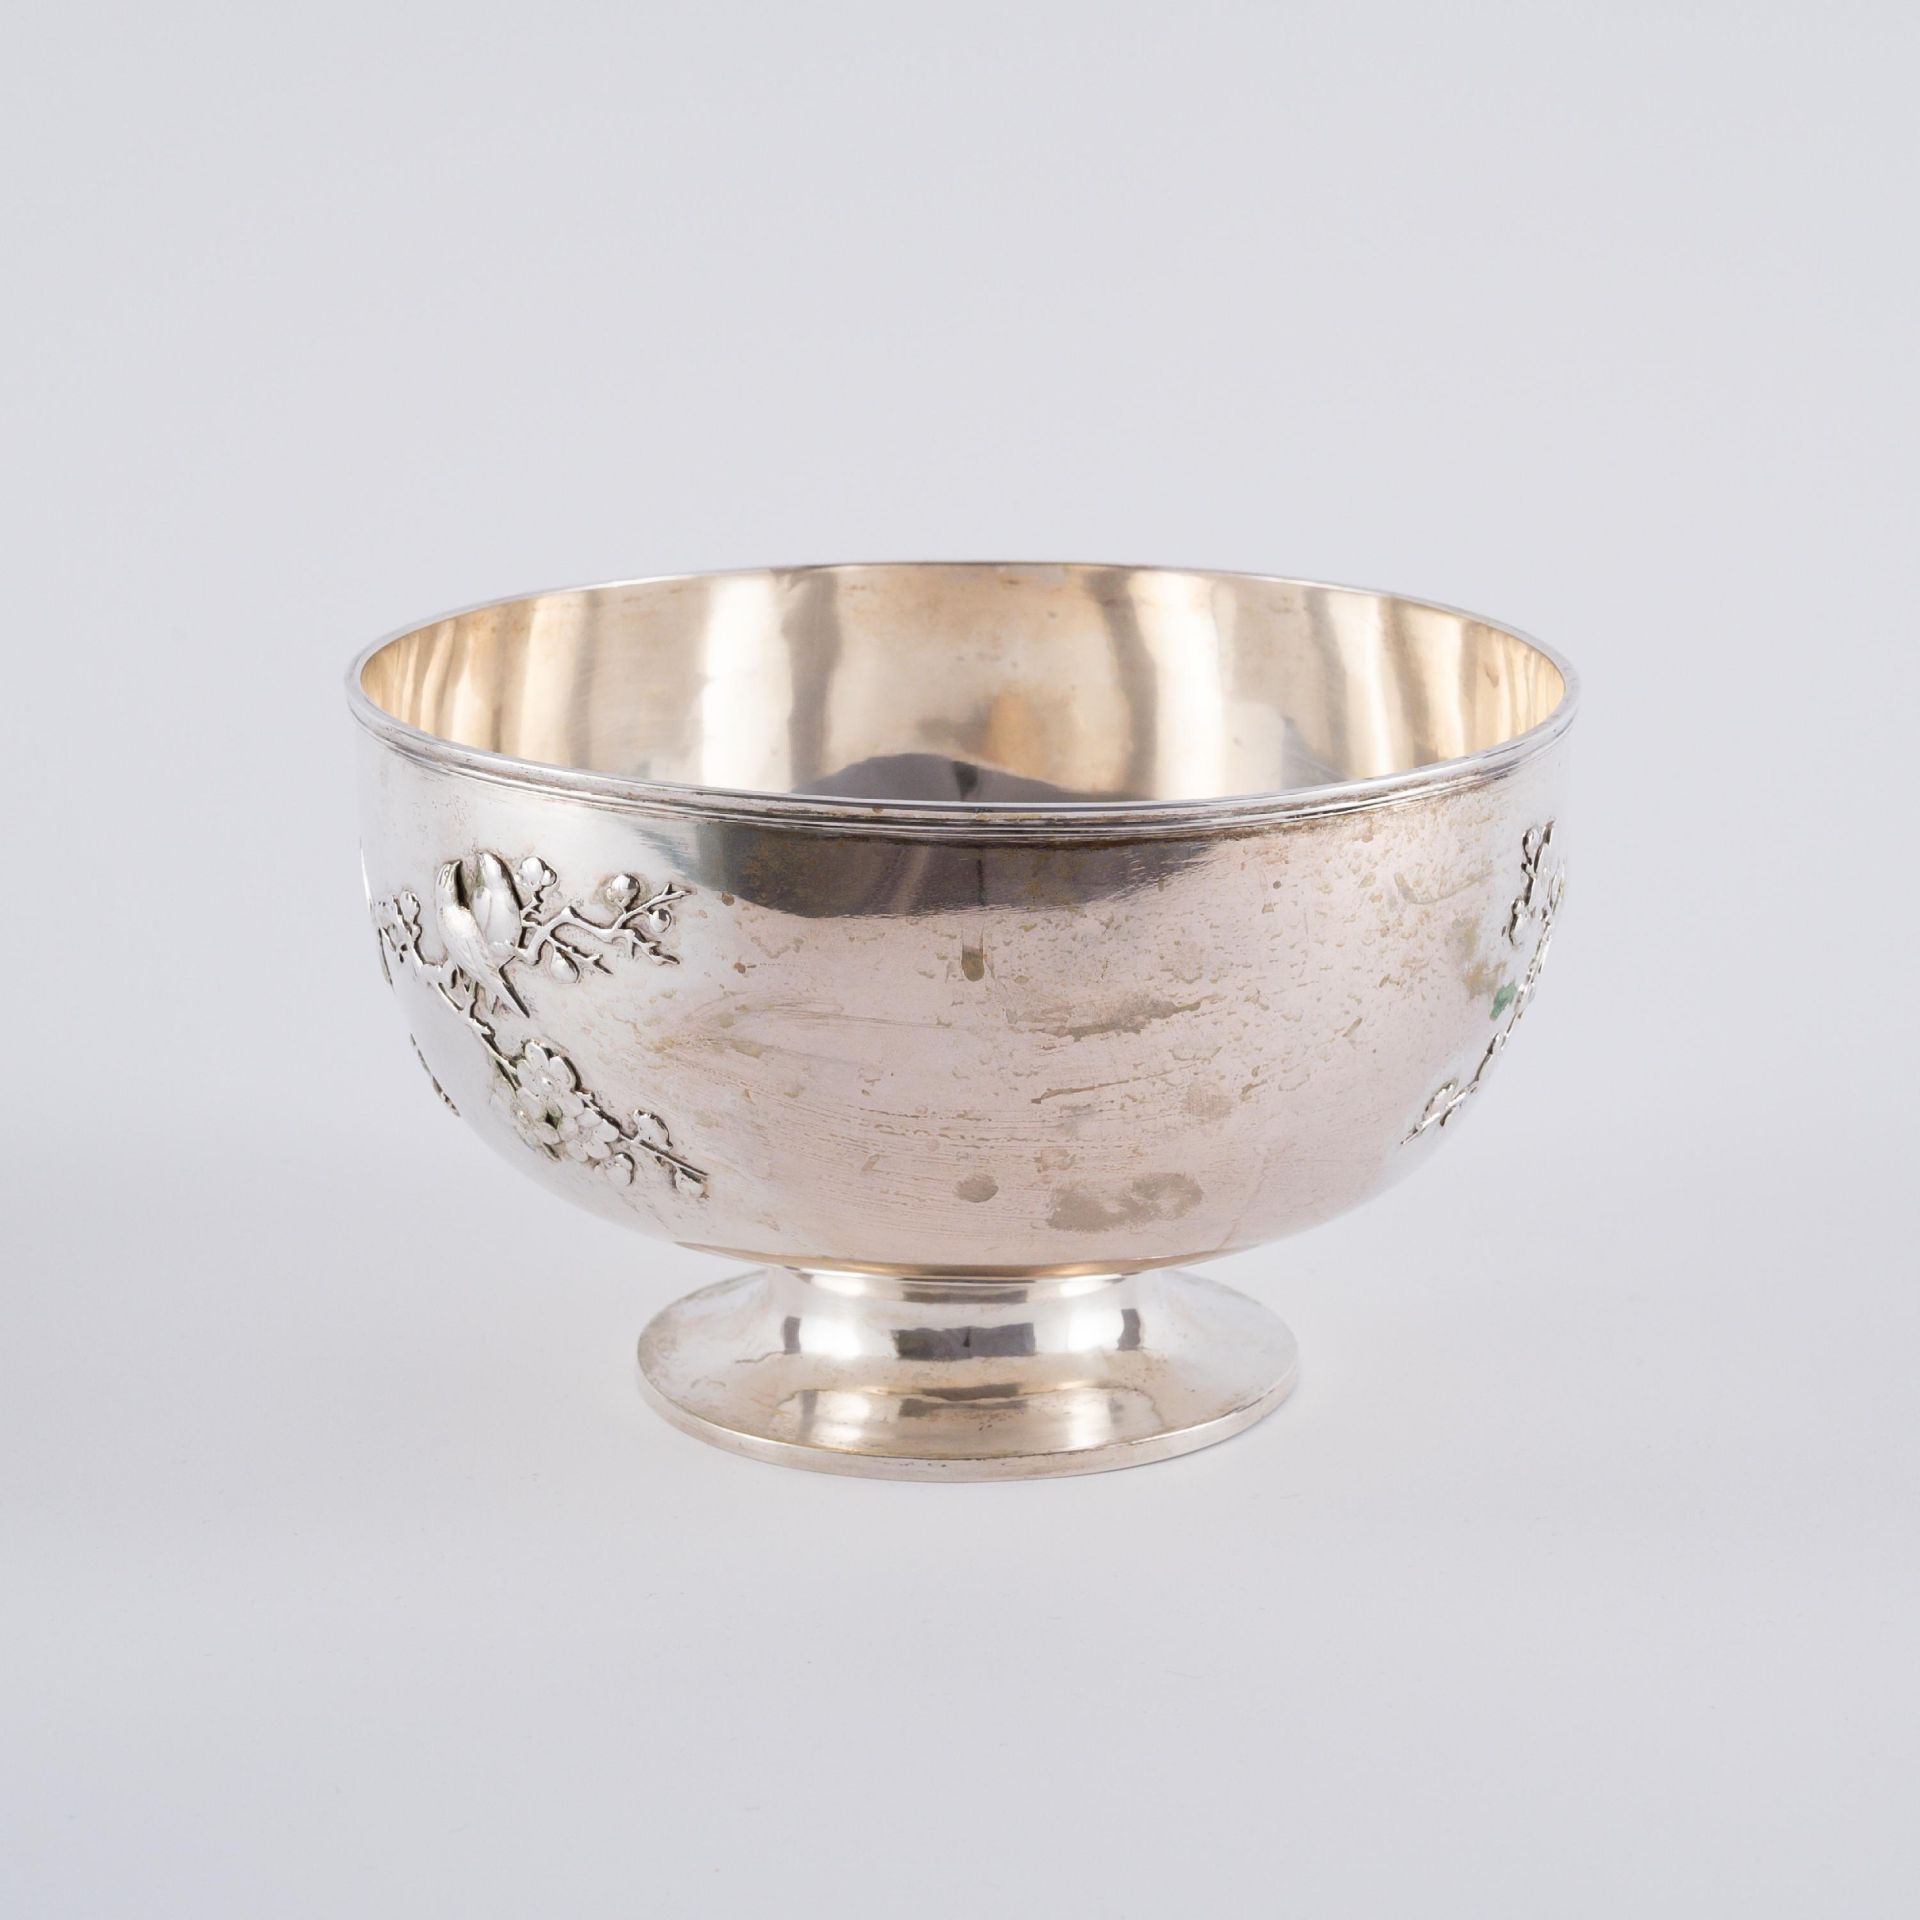 FOOTED SILVER BOWL WITH CHERRYBLOSSOM BRANCH AND BIRD OF PARADISE - Image 2 of 6